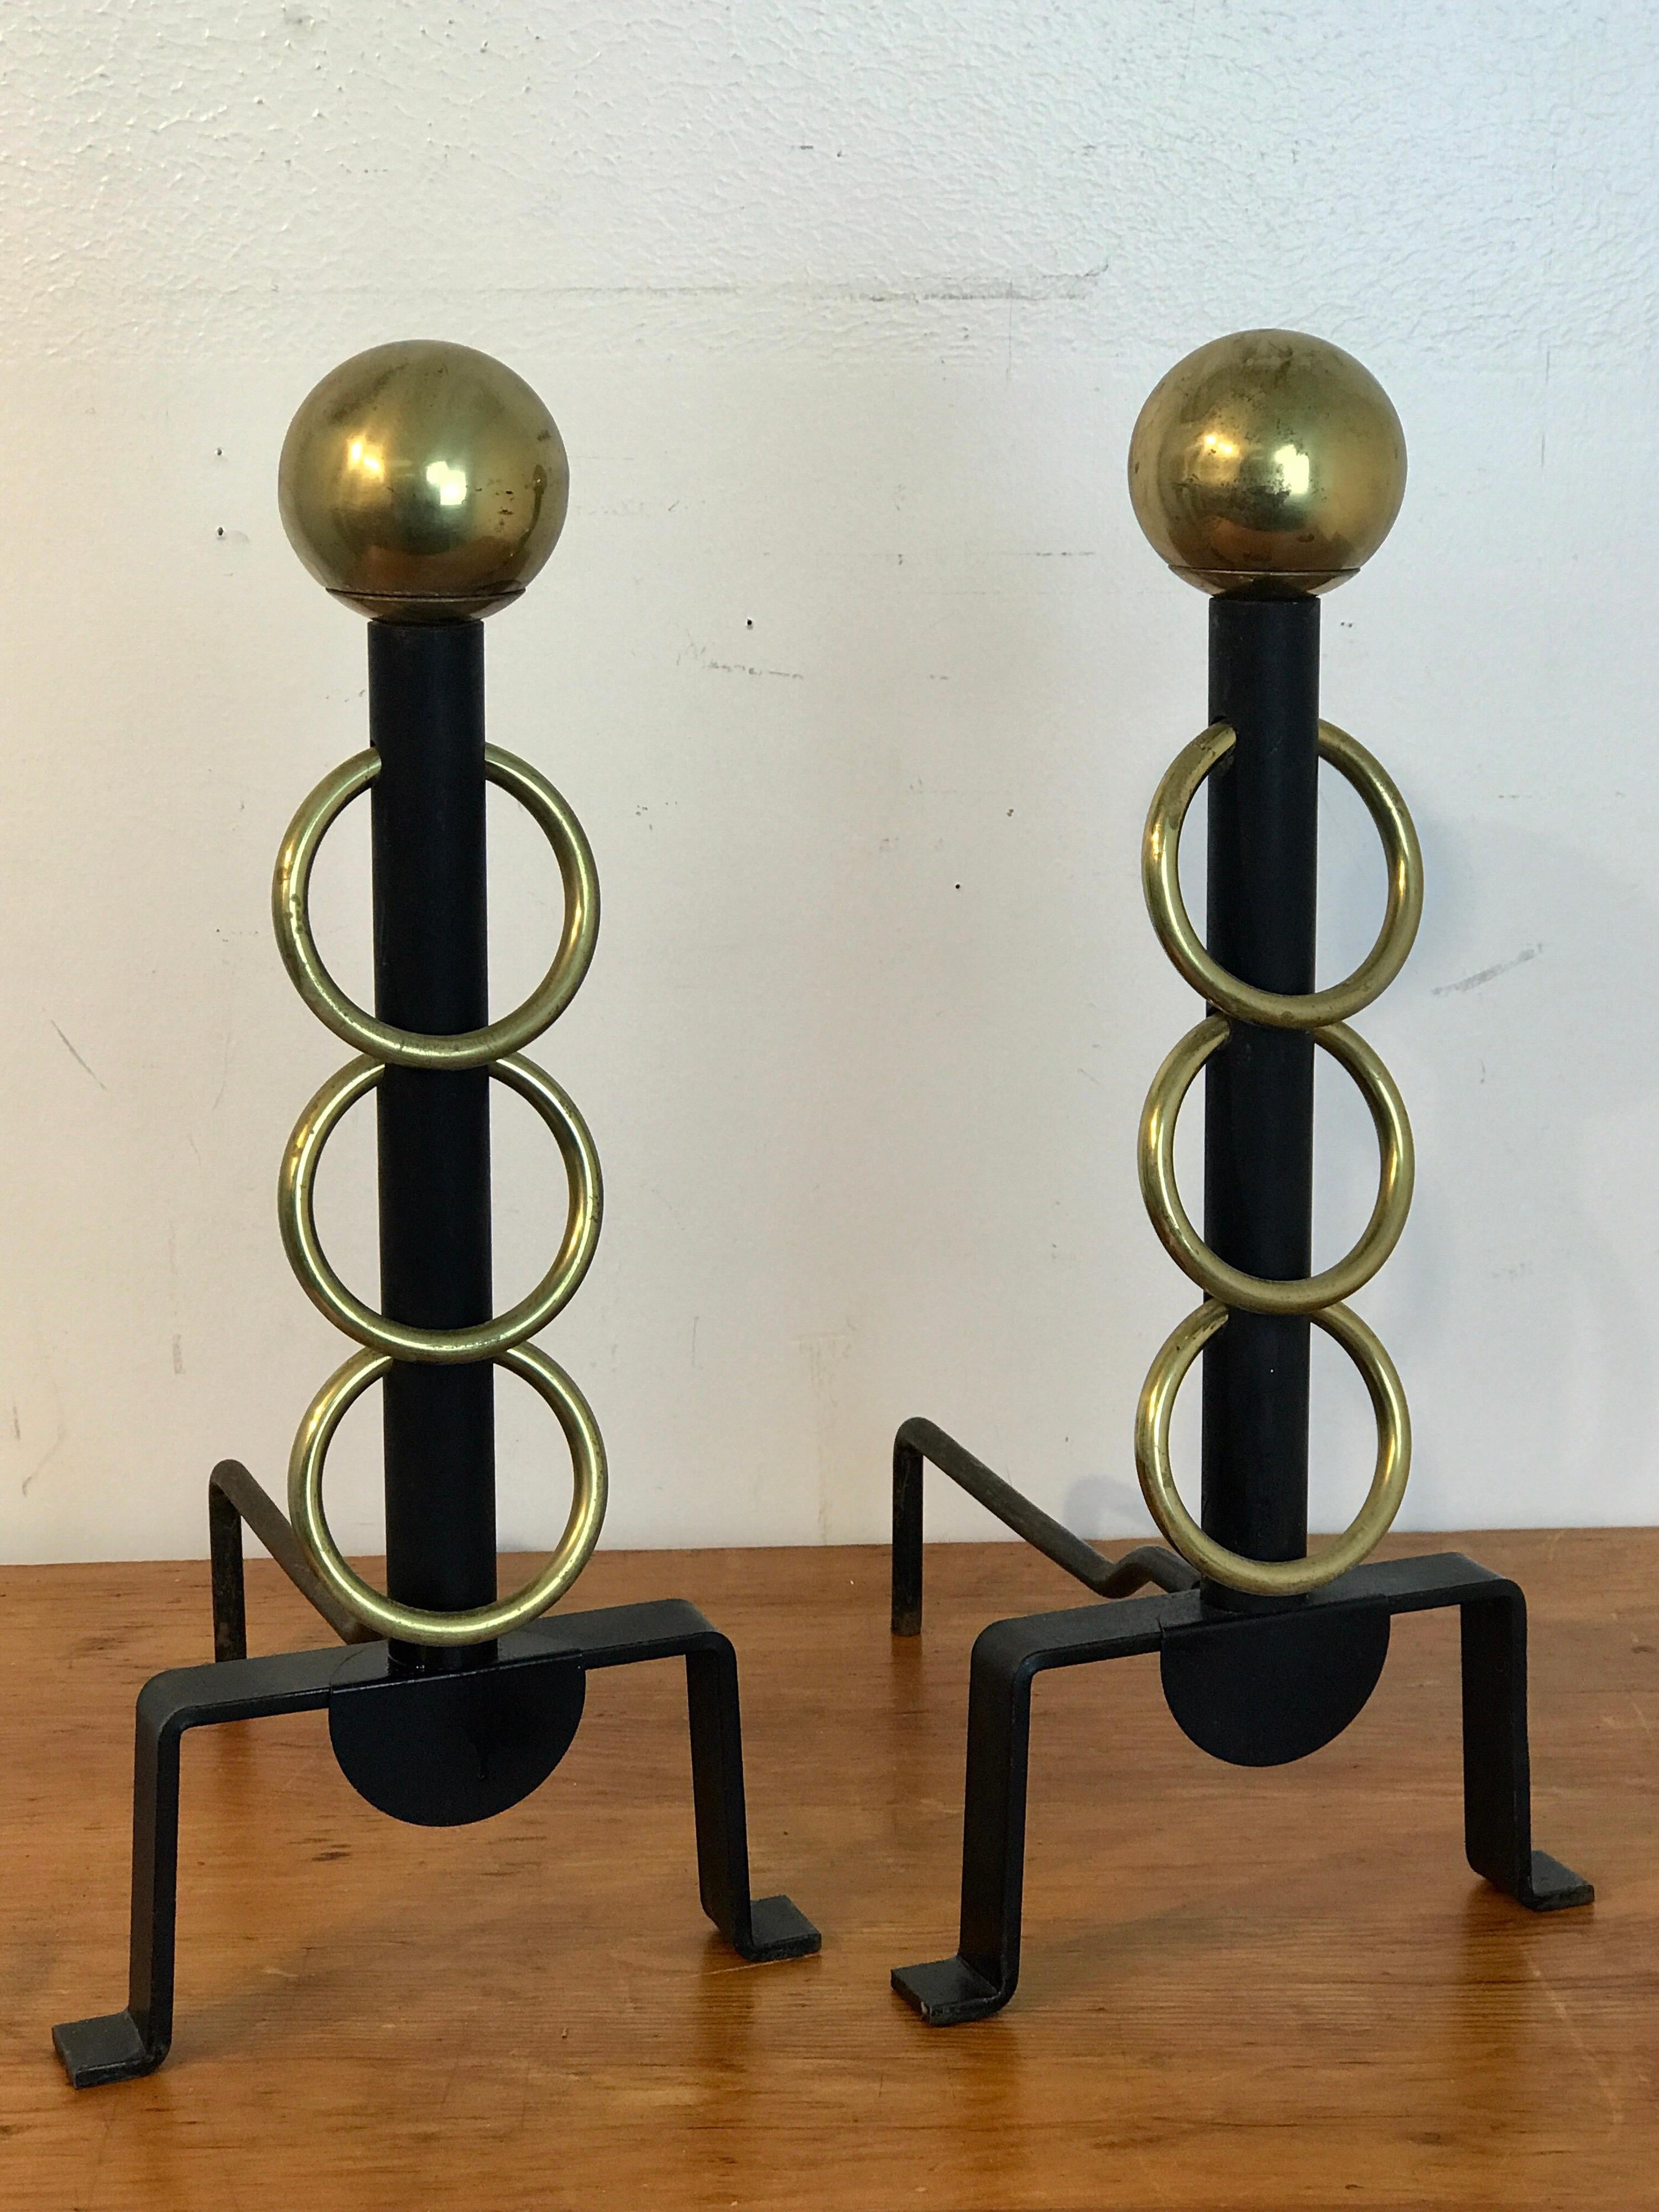 Pair of French modern brass and iron andirons, each one with brass sphere tops, fitted with three 4-inch diameter rings raised on a footed base.